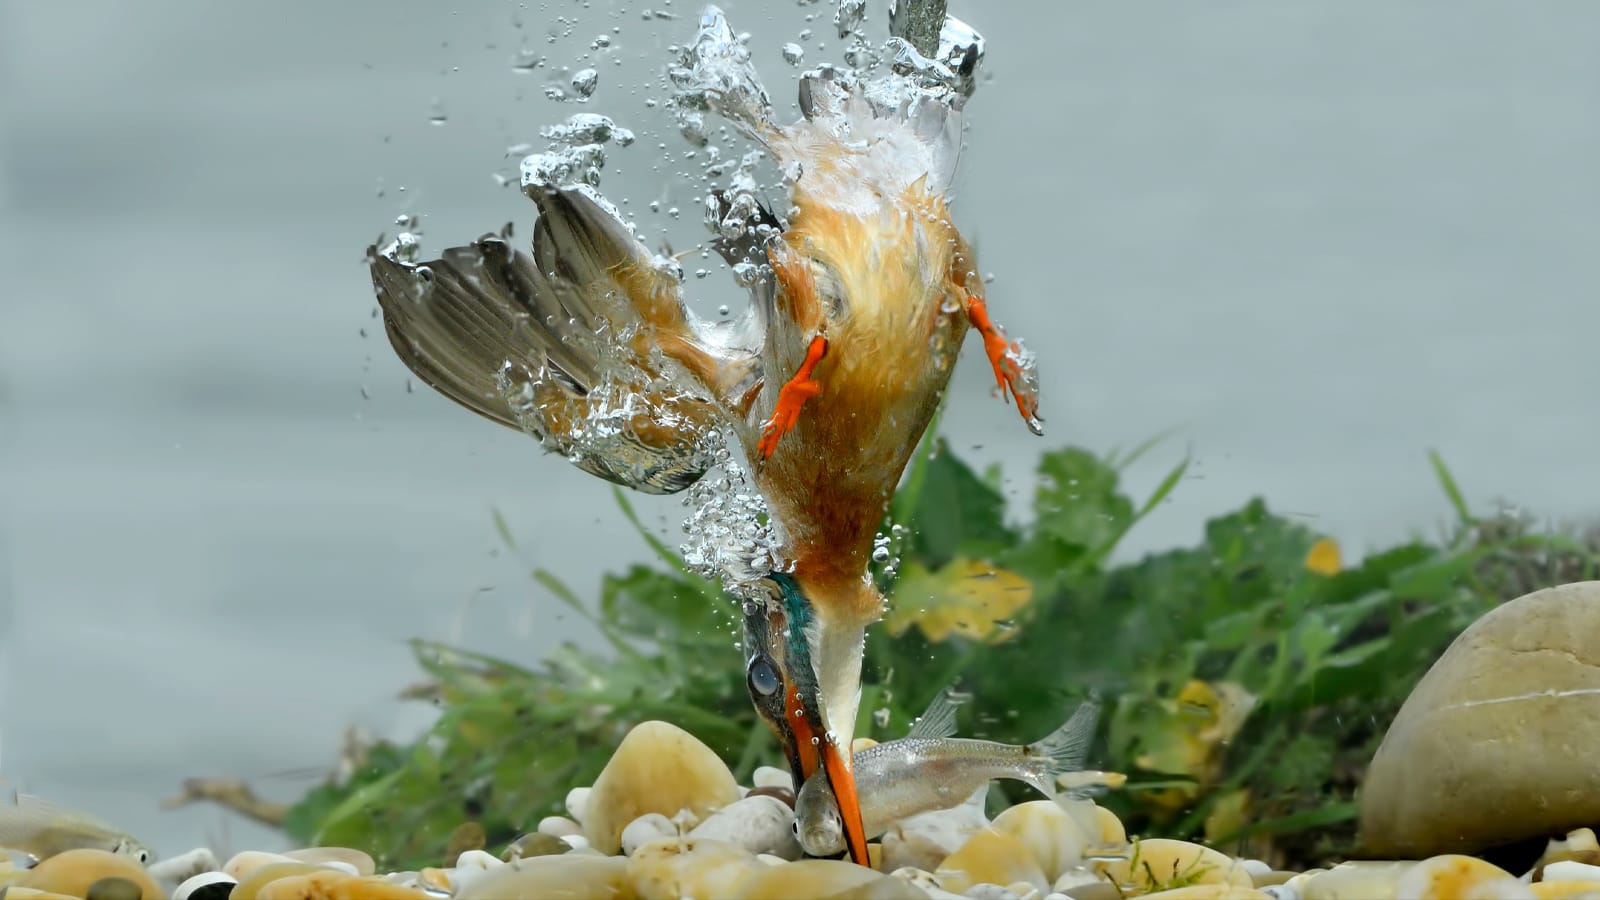 A kingfisher dives into water to grab a fish